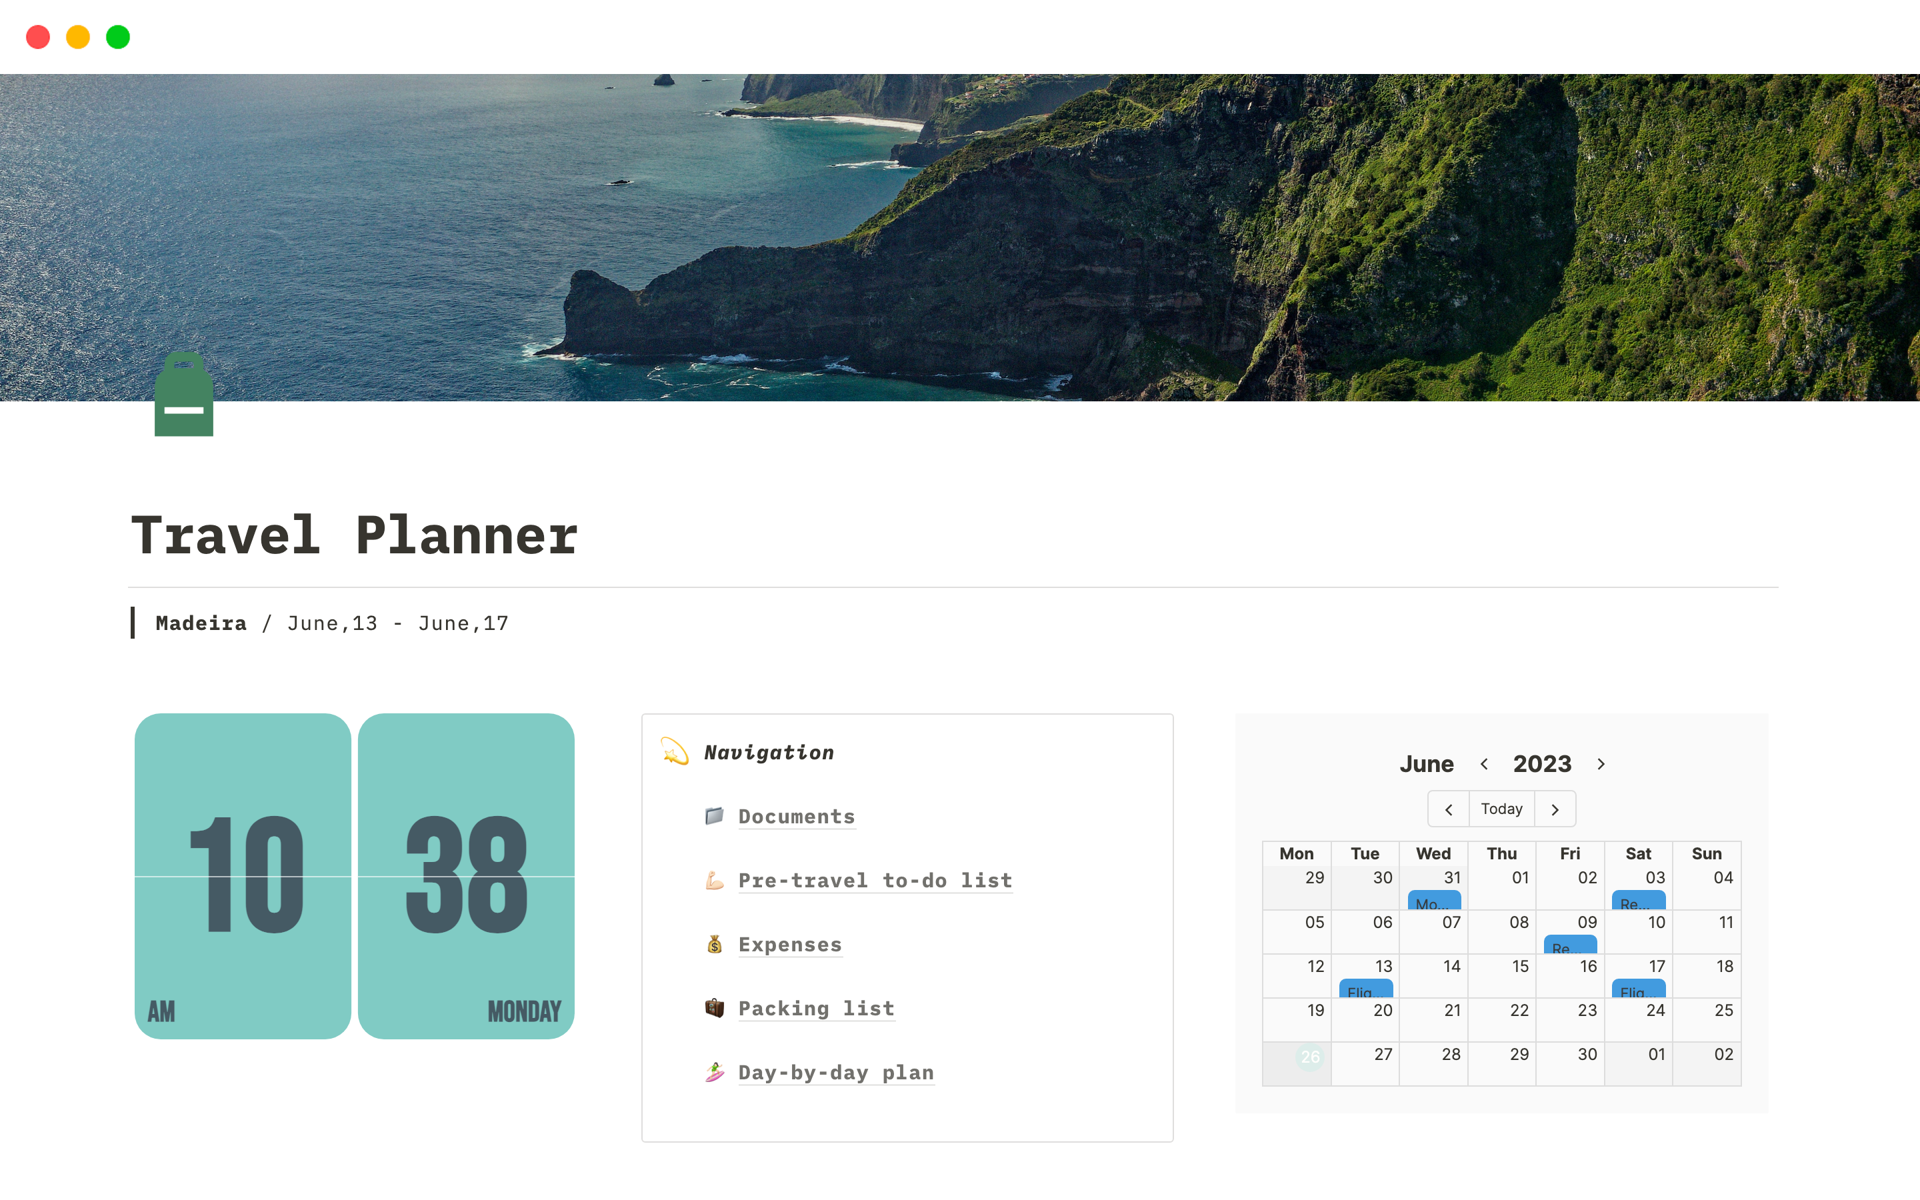 Ultimate Travel Planning - the ultimate companion for organized and stress-free trips!